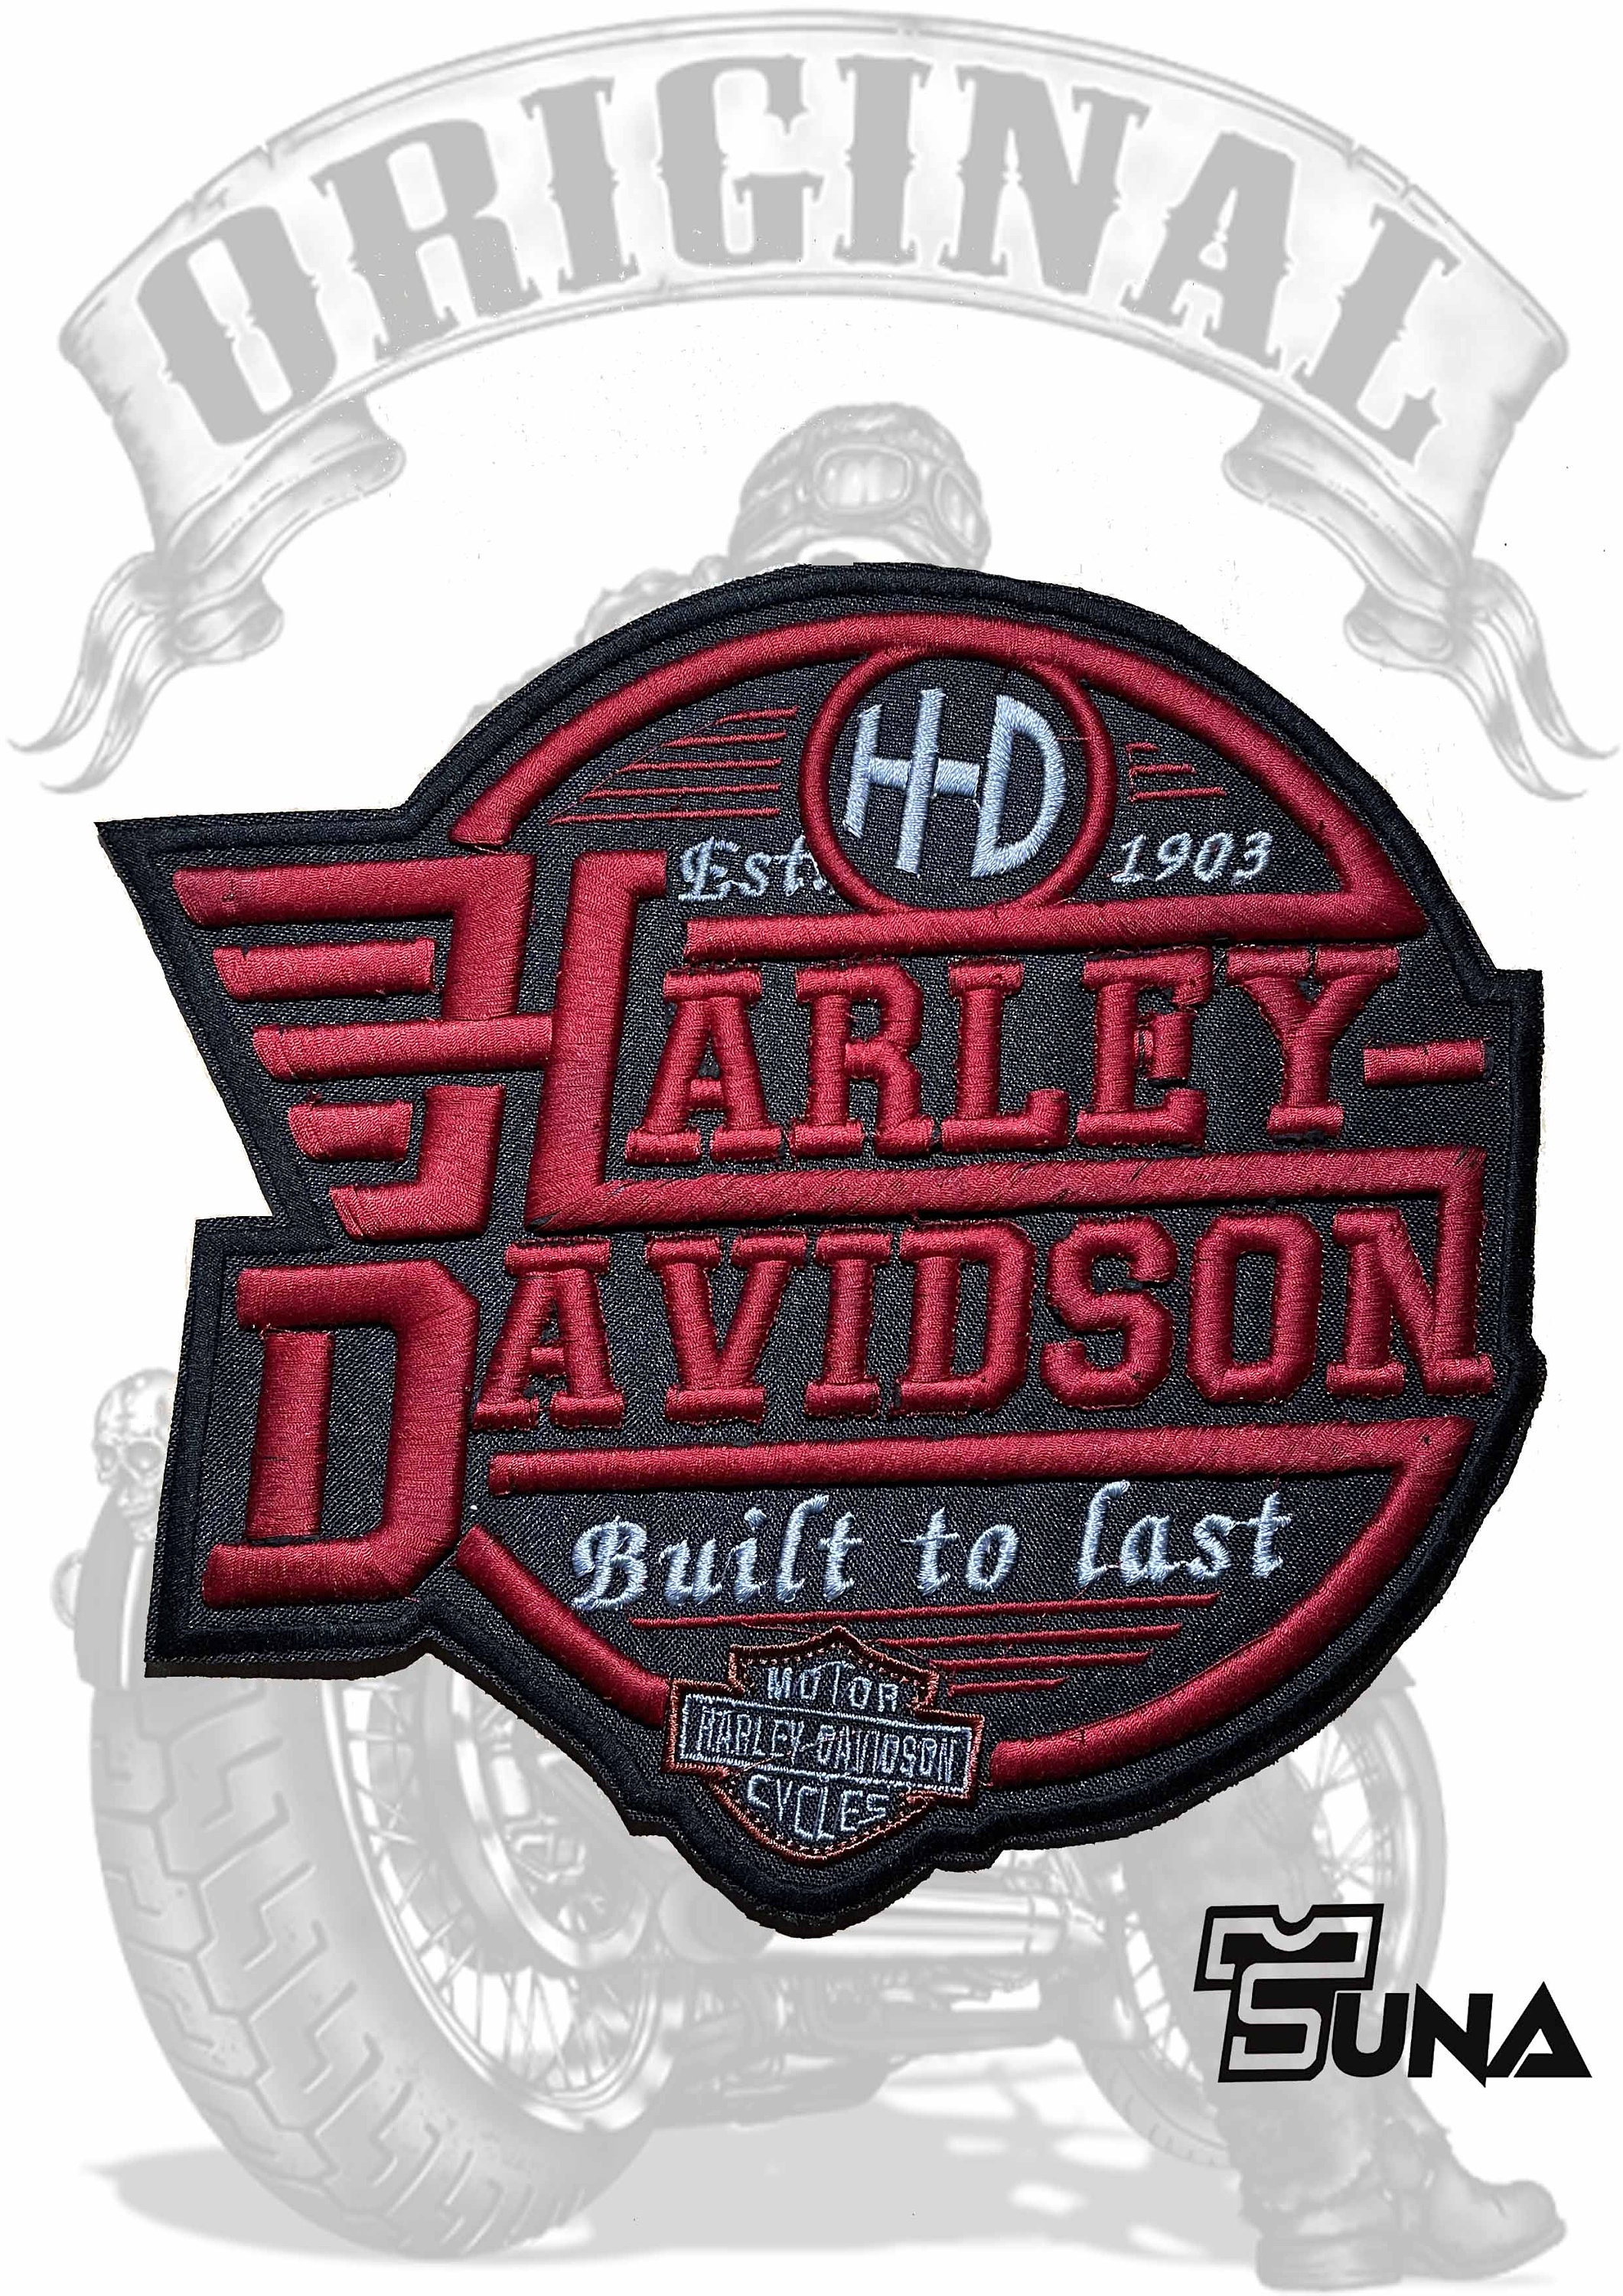 Gray Harley Davidson Patch Motorcycle Embroidered Large Iron on